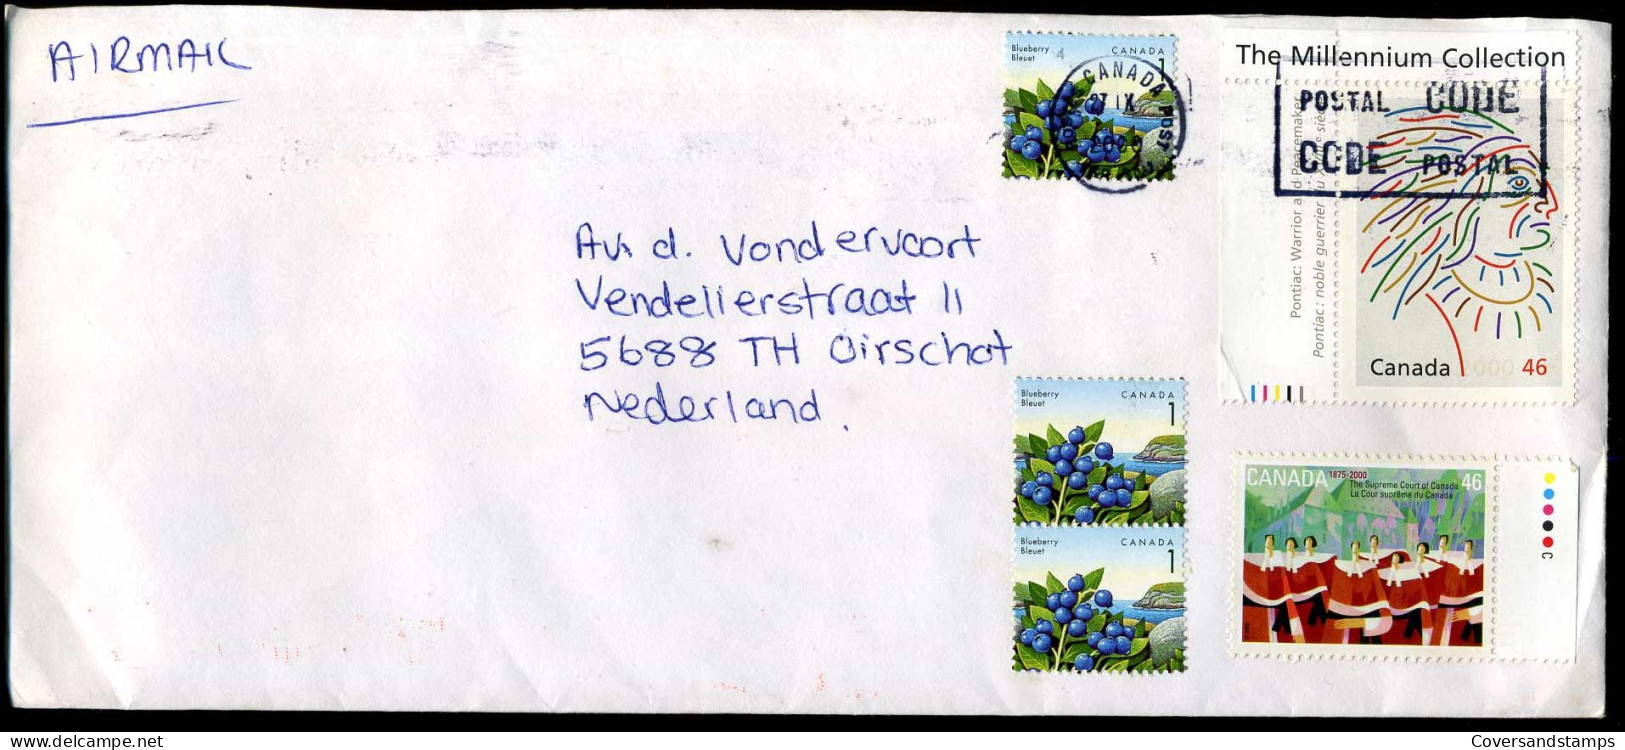 Cover To Oirschot, Netherlands - Covers & Documents